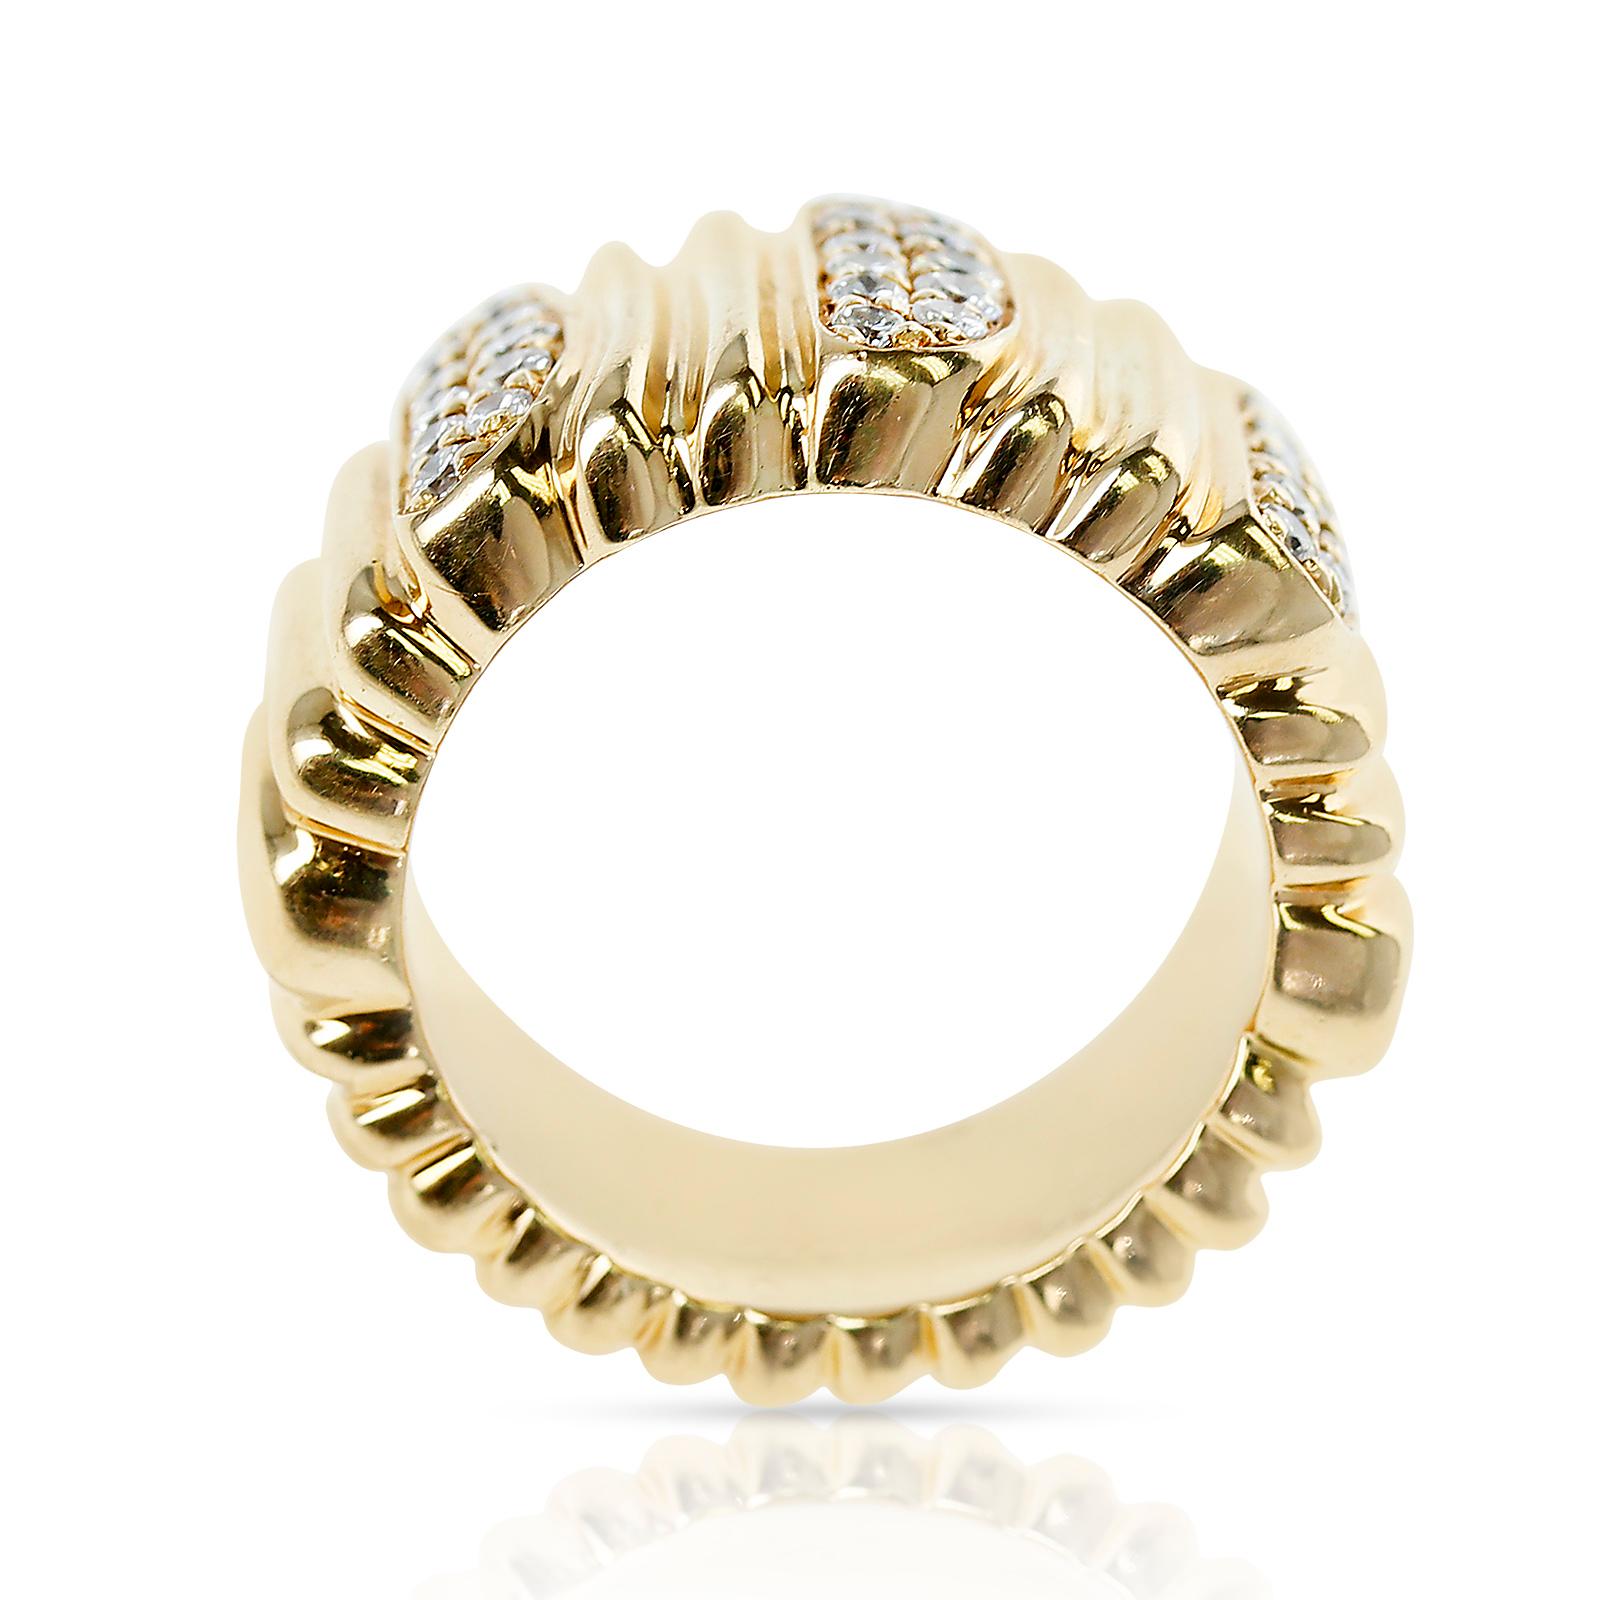 Cartier Textured 18 Karat Yellow Gold and Diamond Band Ring In Excellent Condition For Sale In New York, NY